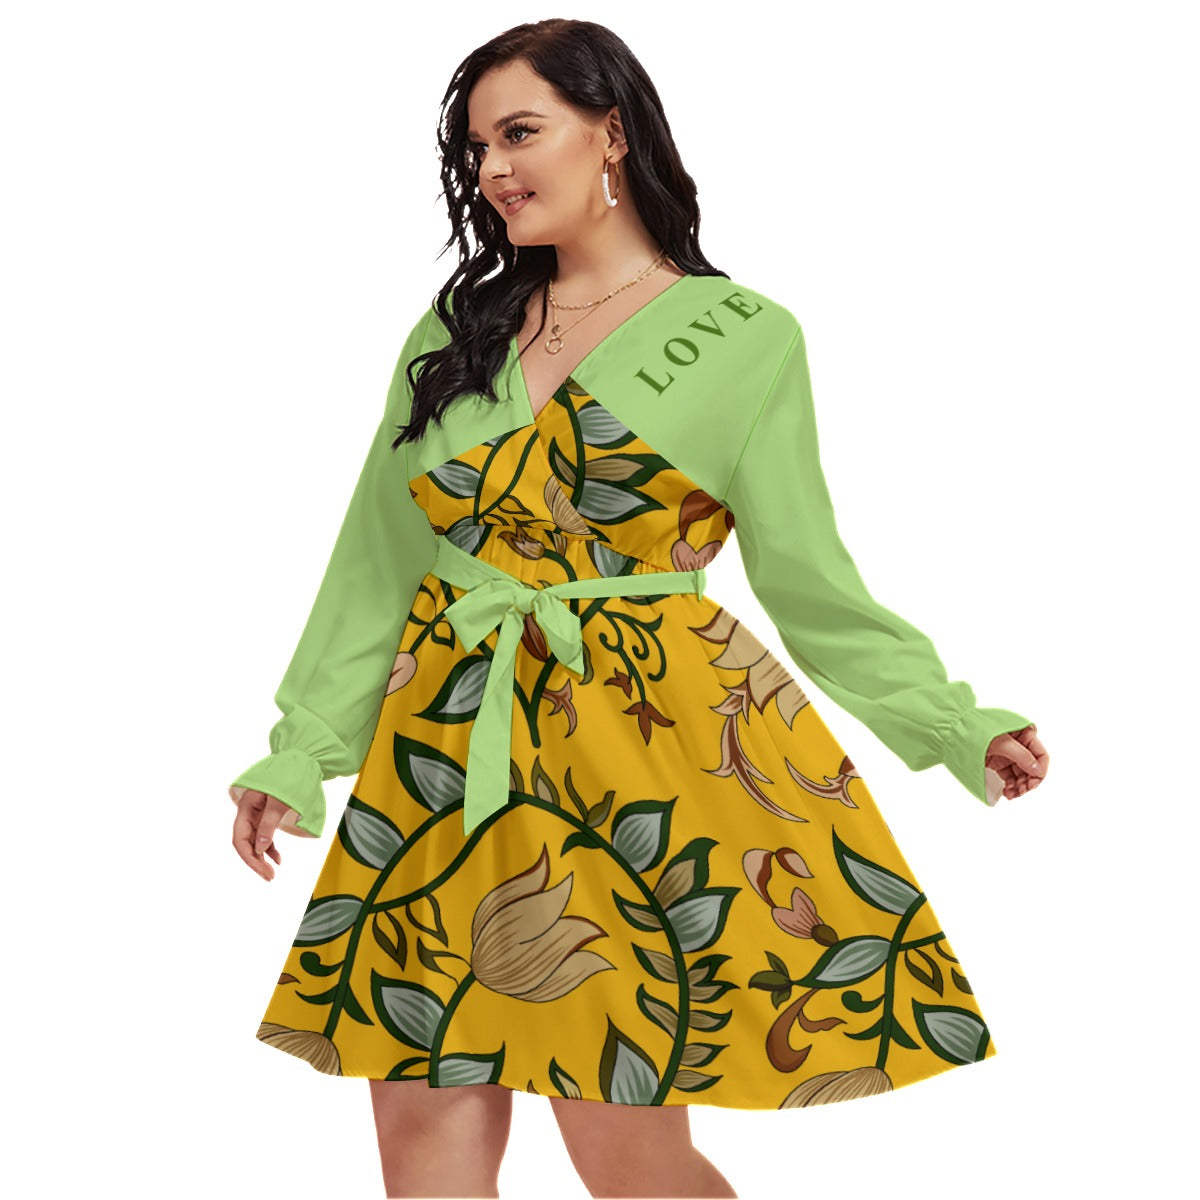 All-Over Print Women's V-neck Dress With Waistband(Plus Size)